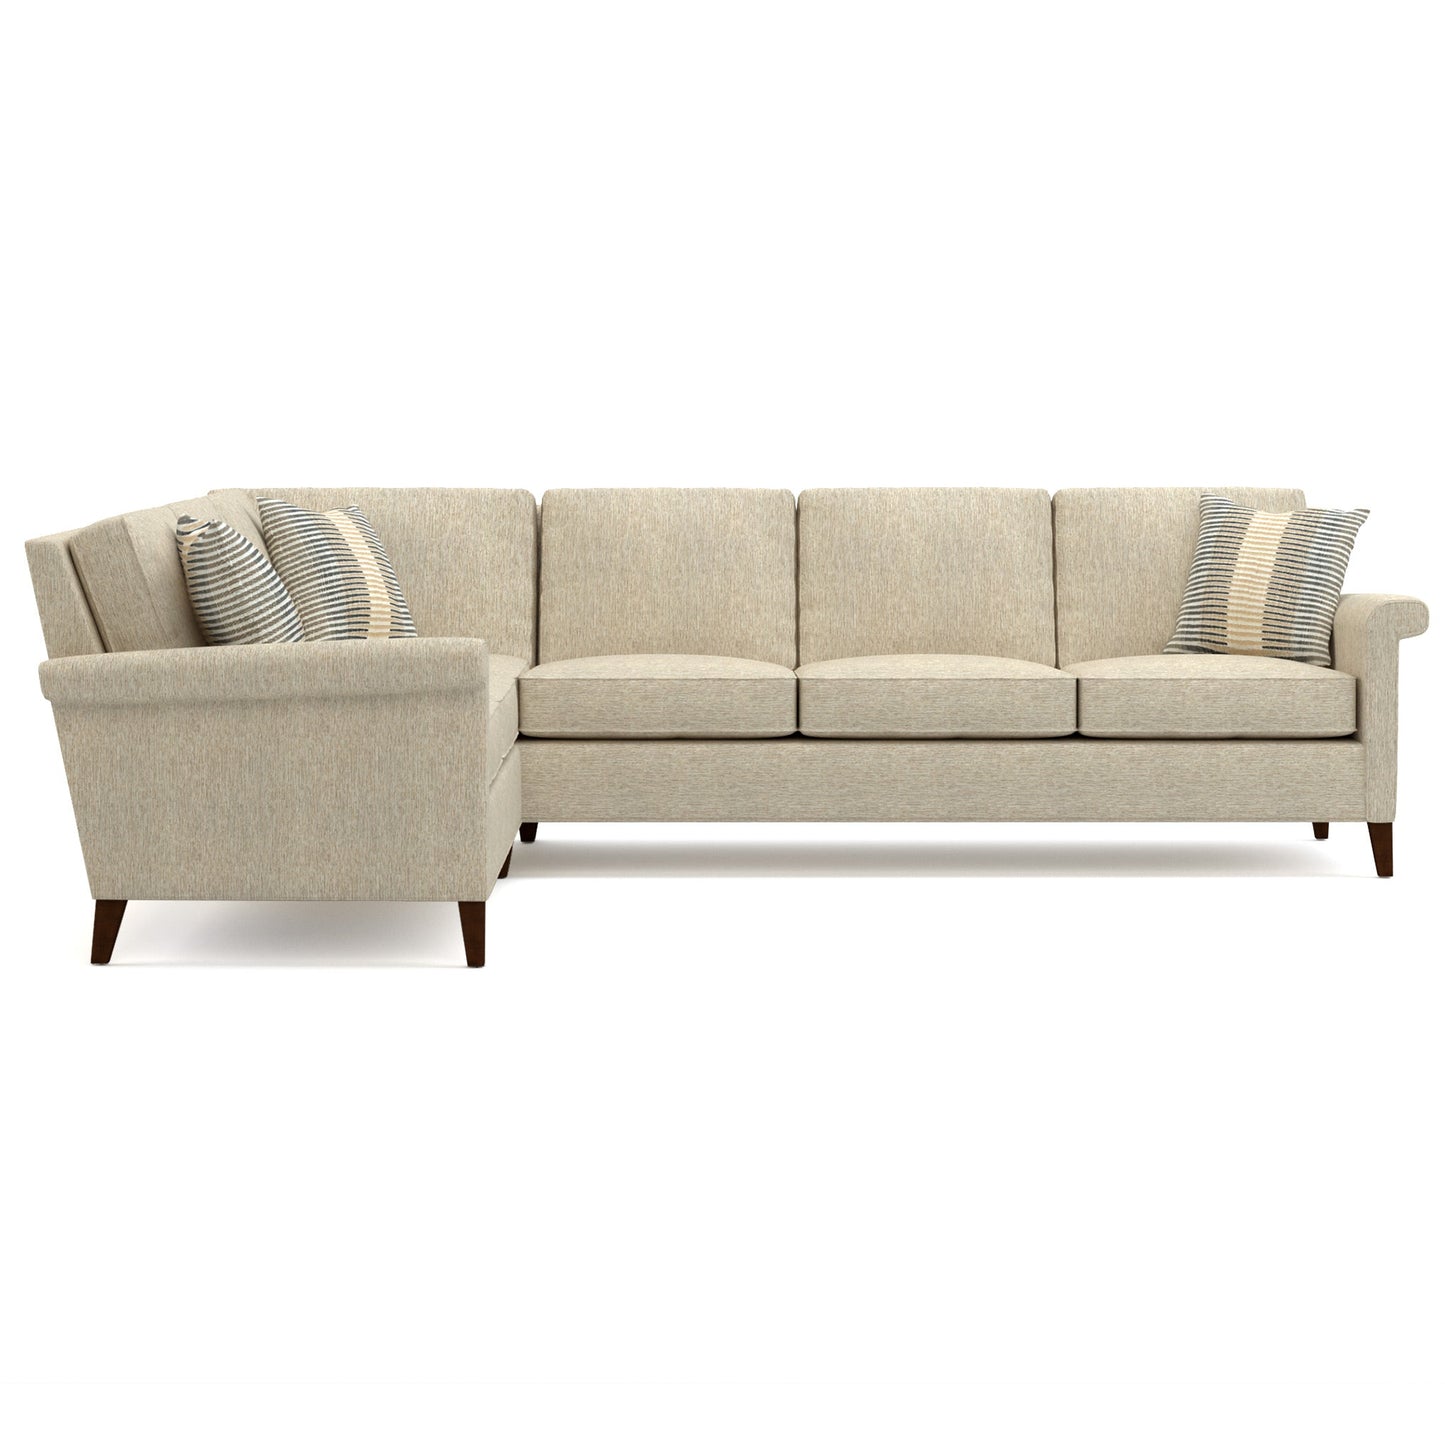 Belleville Sectional Fabric 4870-19